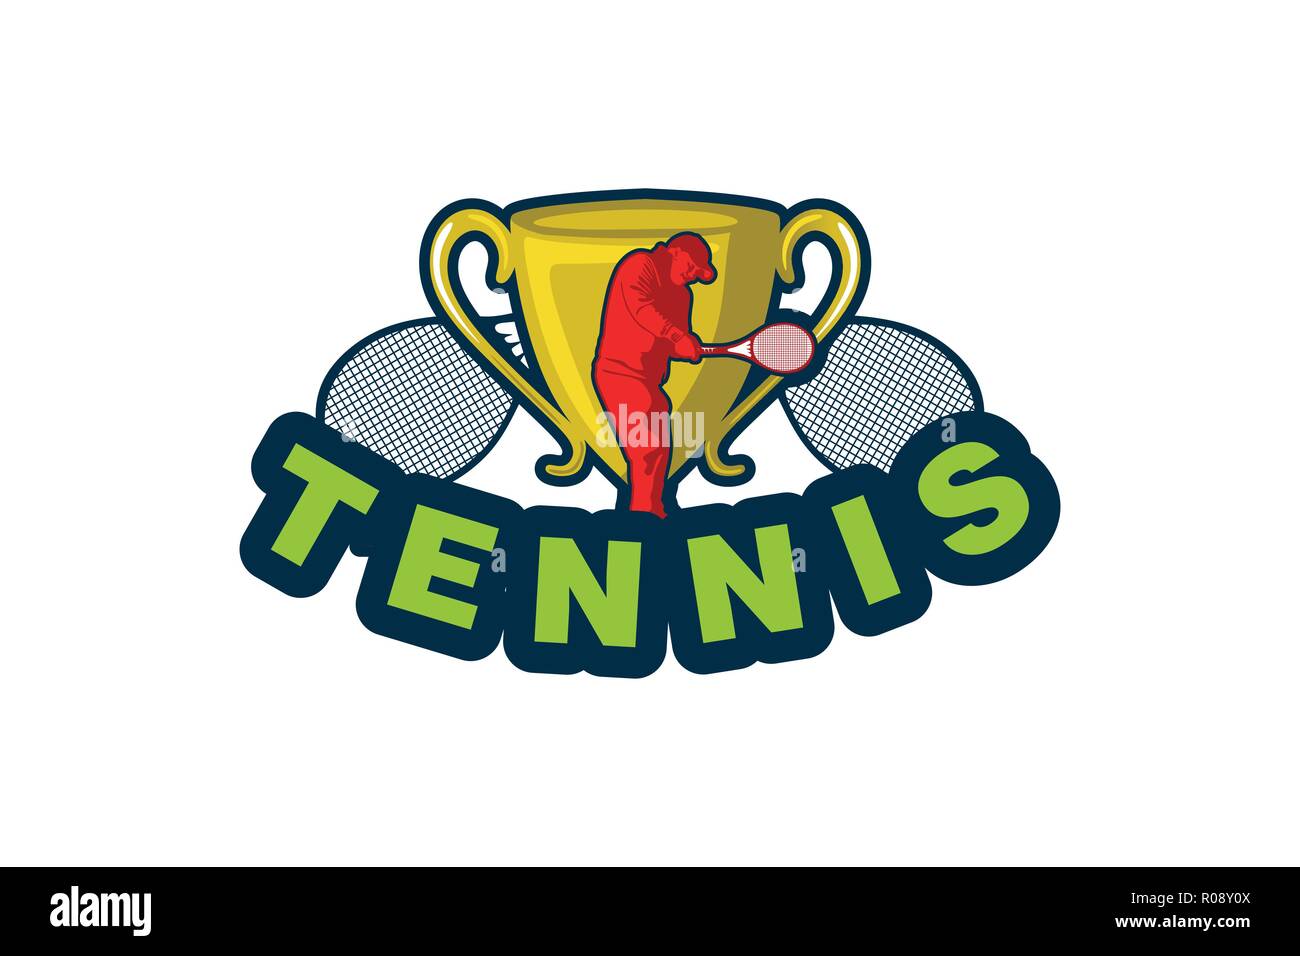 tennis label with trophy and tennis player logo design inspiration ...